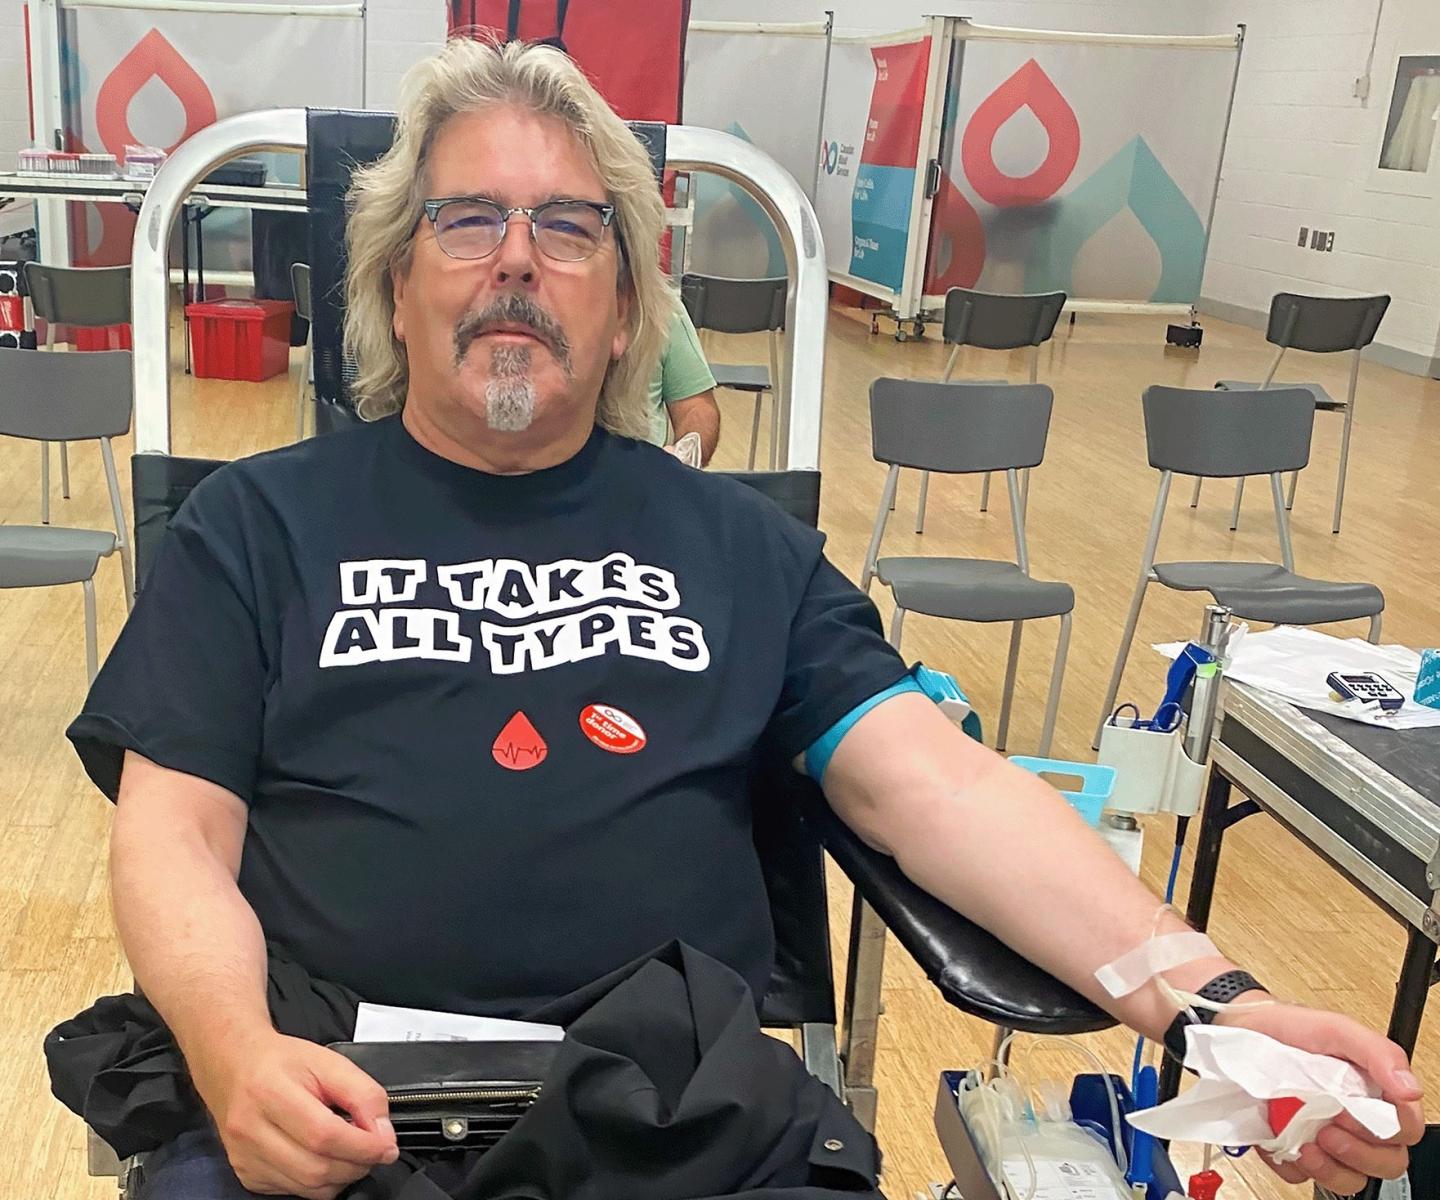 Man donating blood wearing T shirt that says "It takes all types"